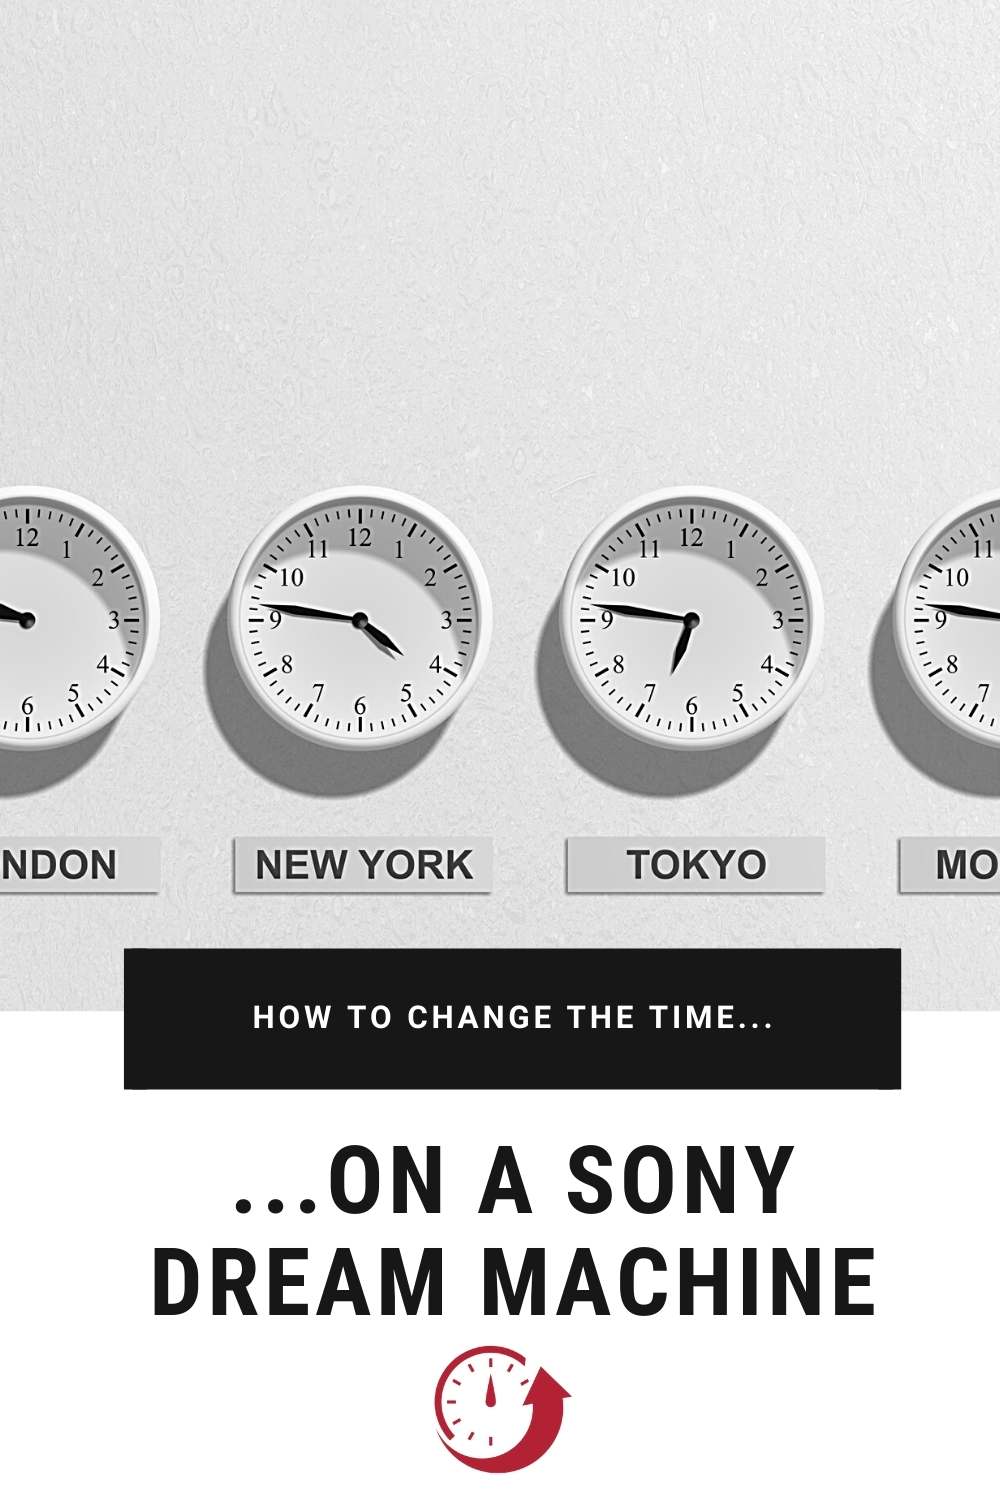 How To Change The Time on a sony dream machine